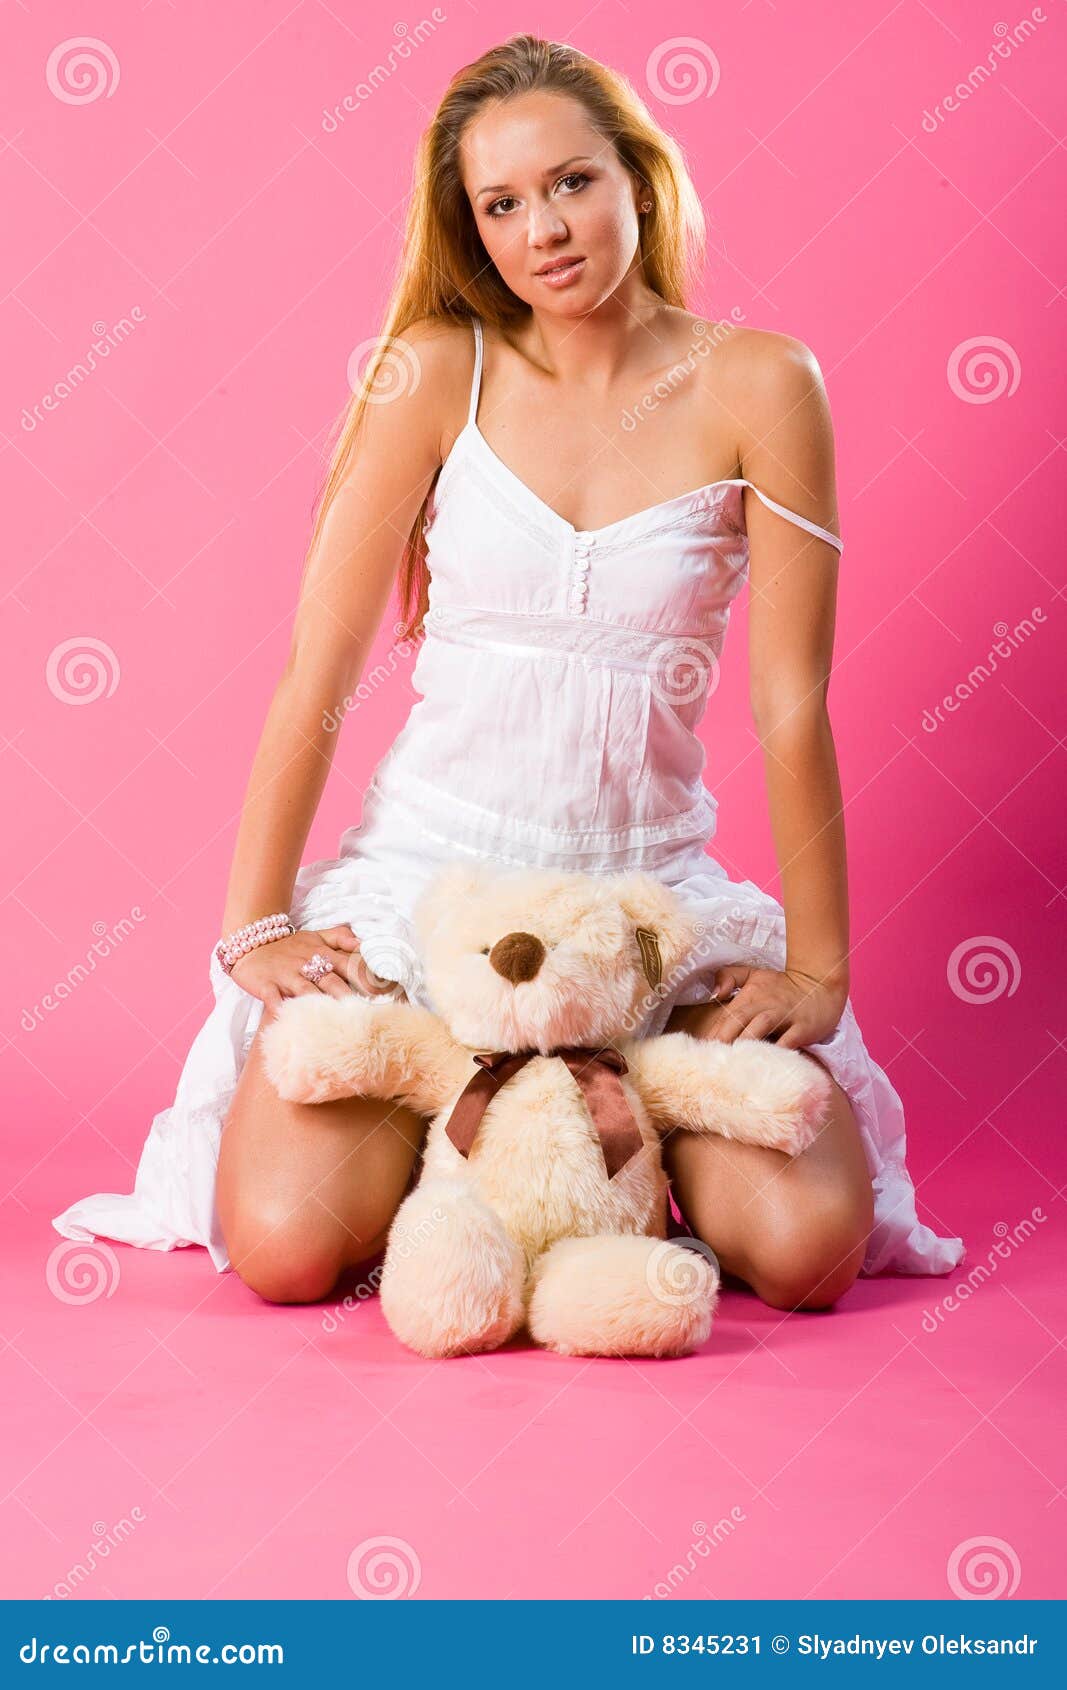 sweetness blond with teddy